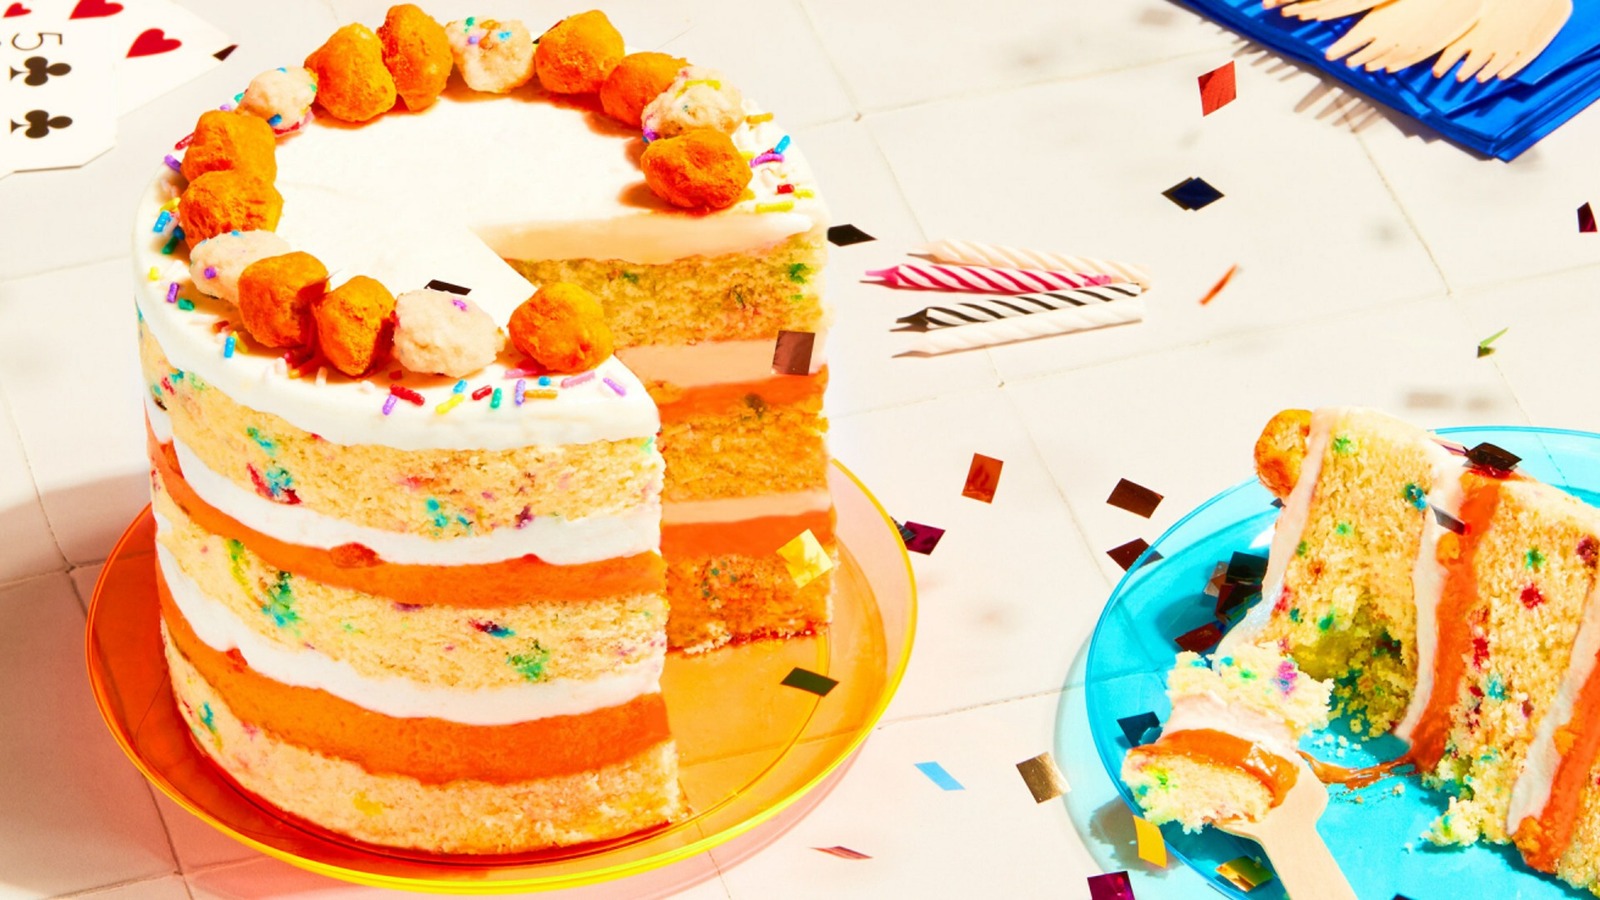 Christina Tosi Reveals How to Make Show-Stopping Layer Cakes